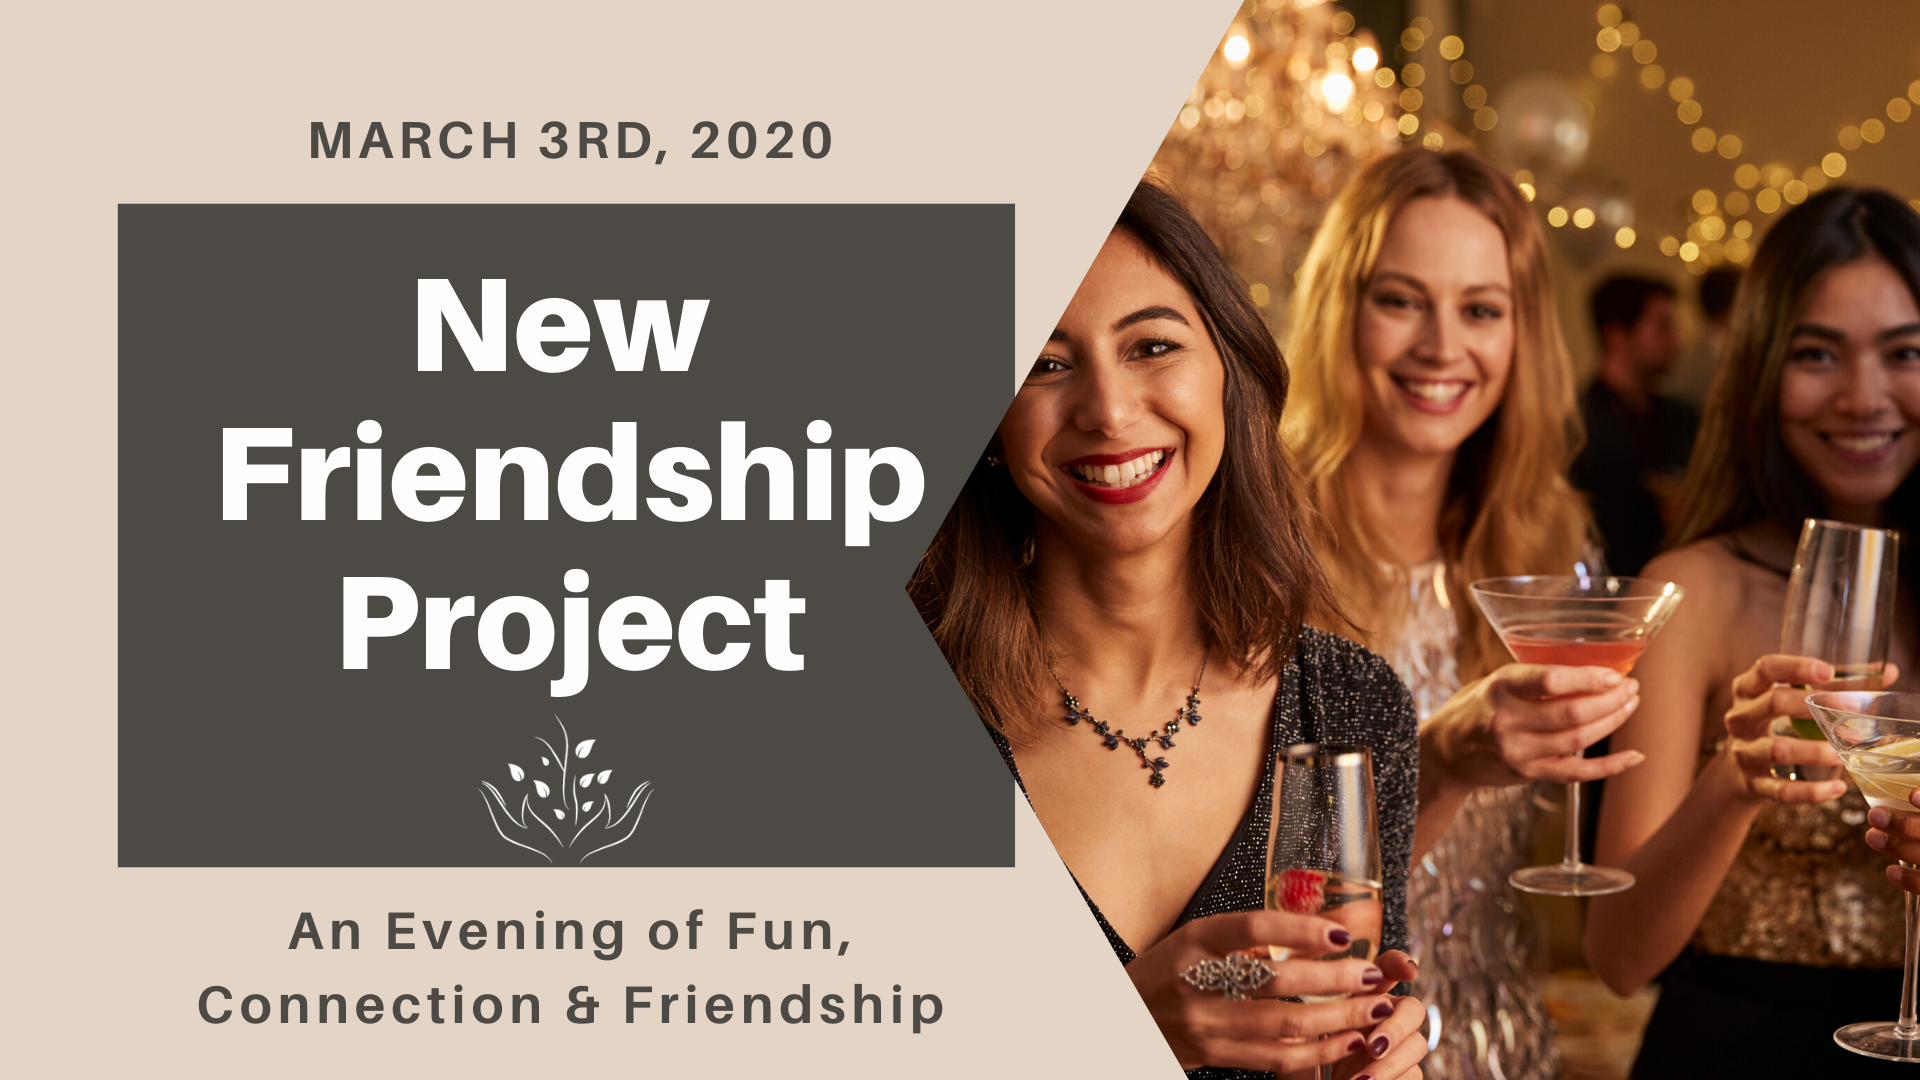 New Friendship Project Night Out